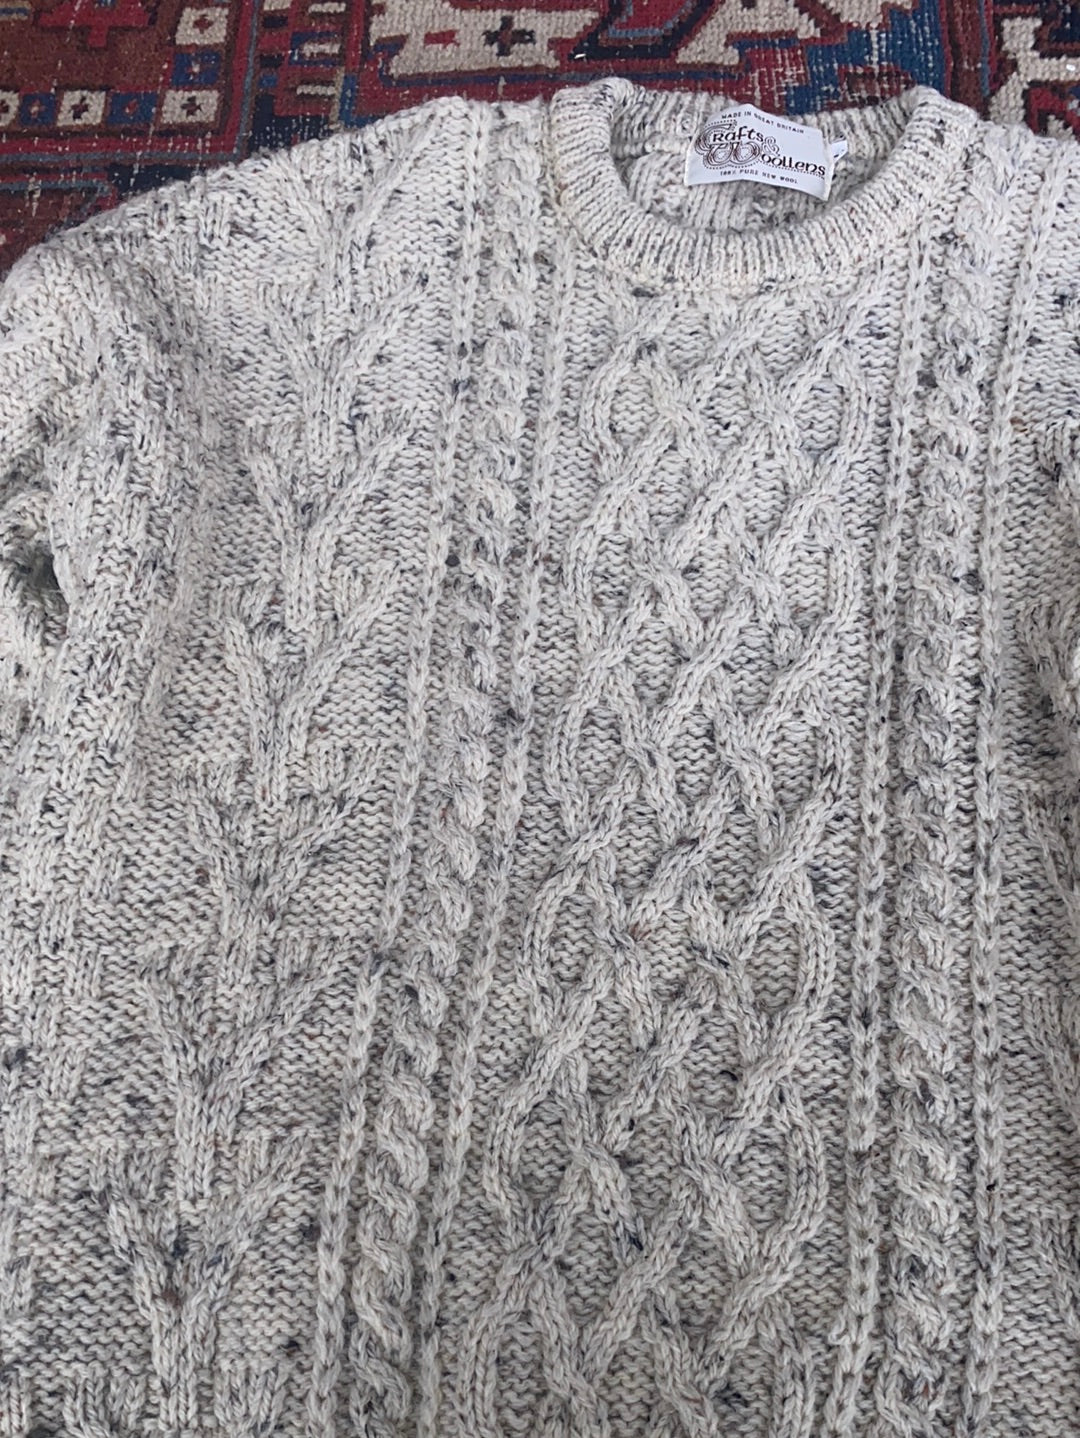 Vintage Irish Knit Pullover Sweater - Speckled